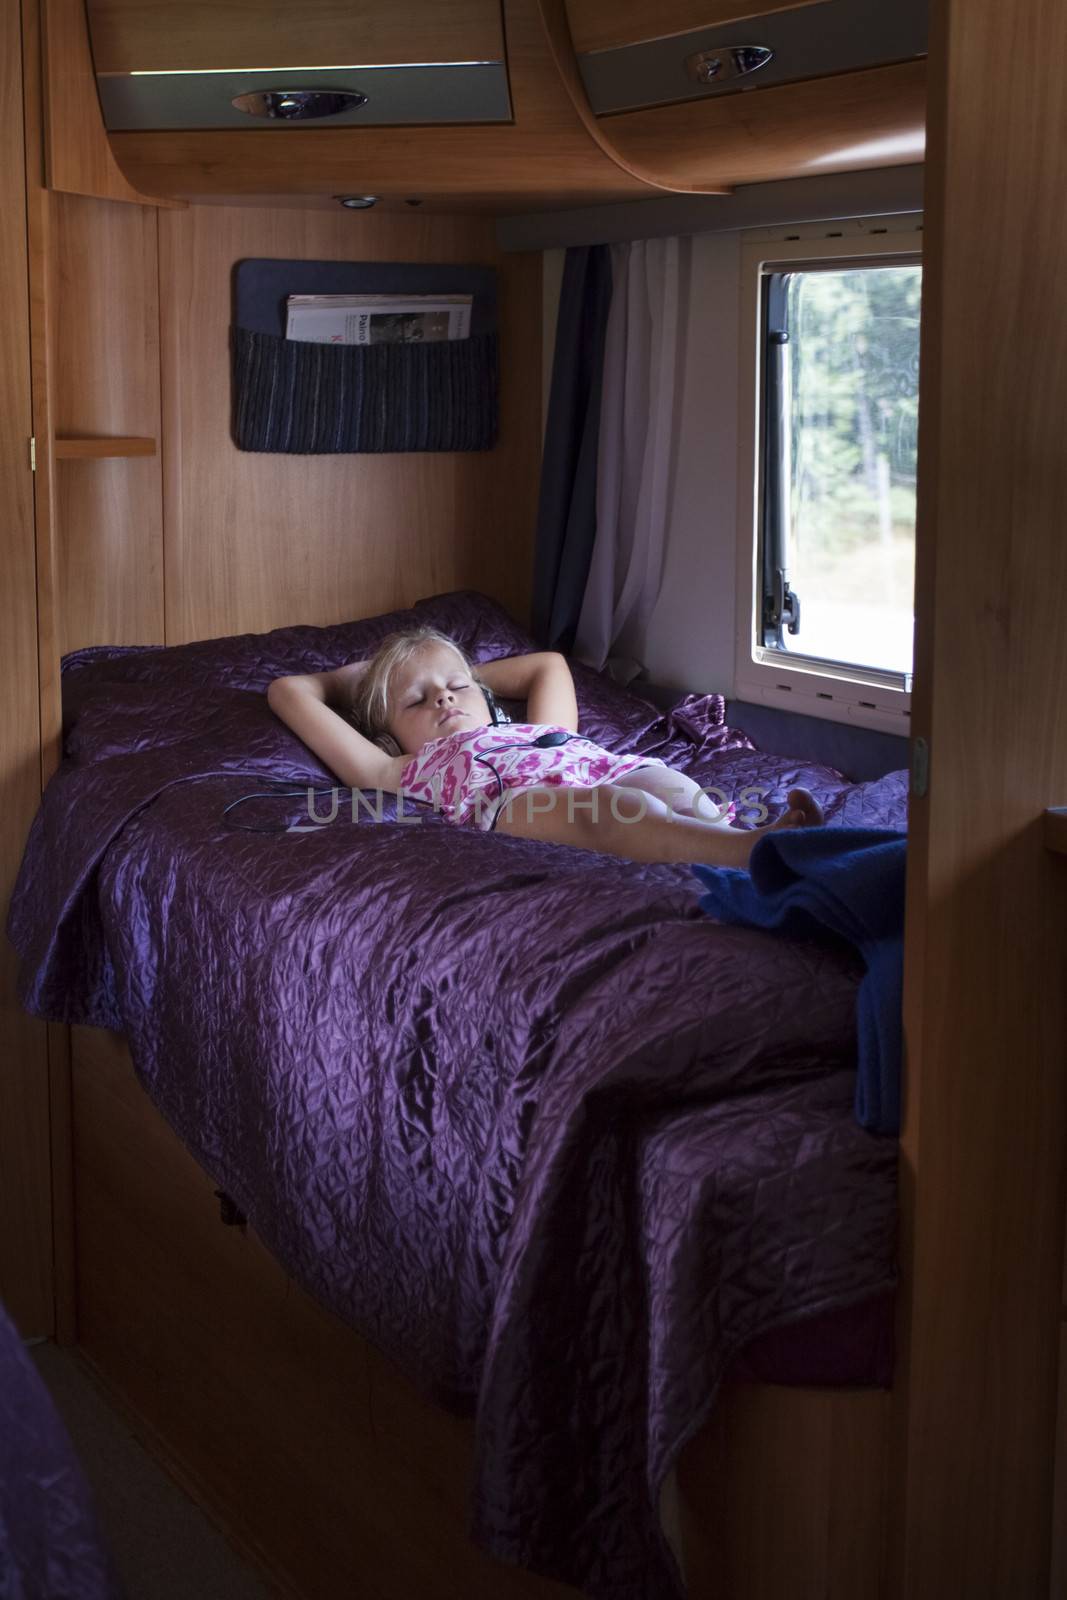 Child in camping caravan by annems